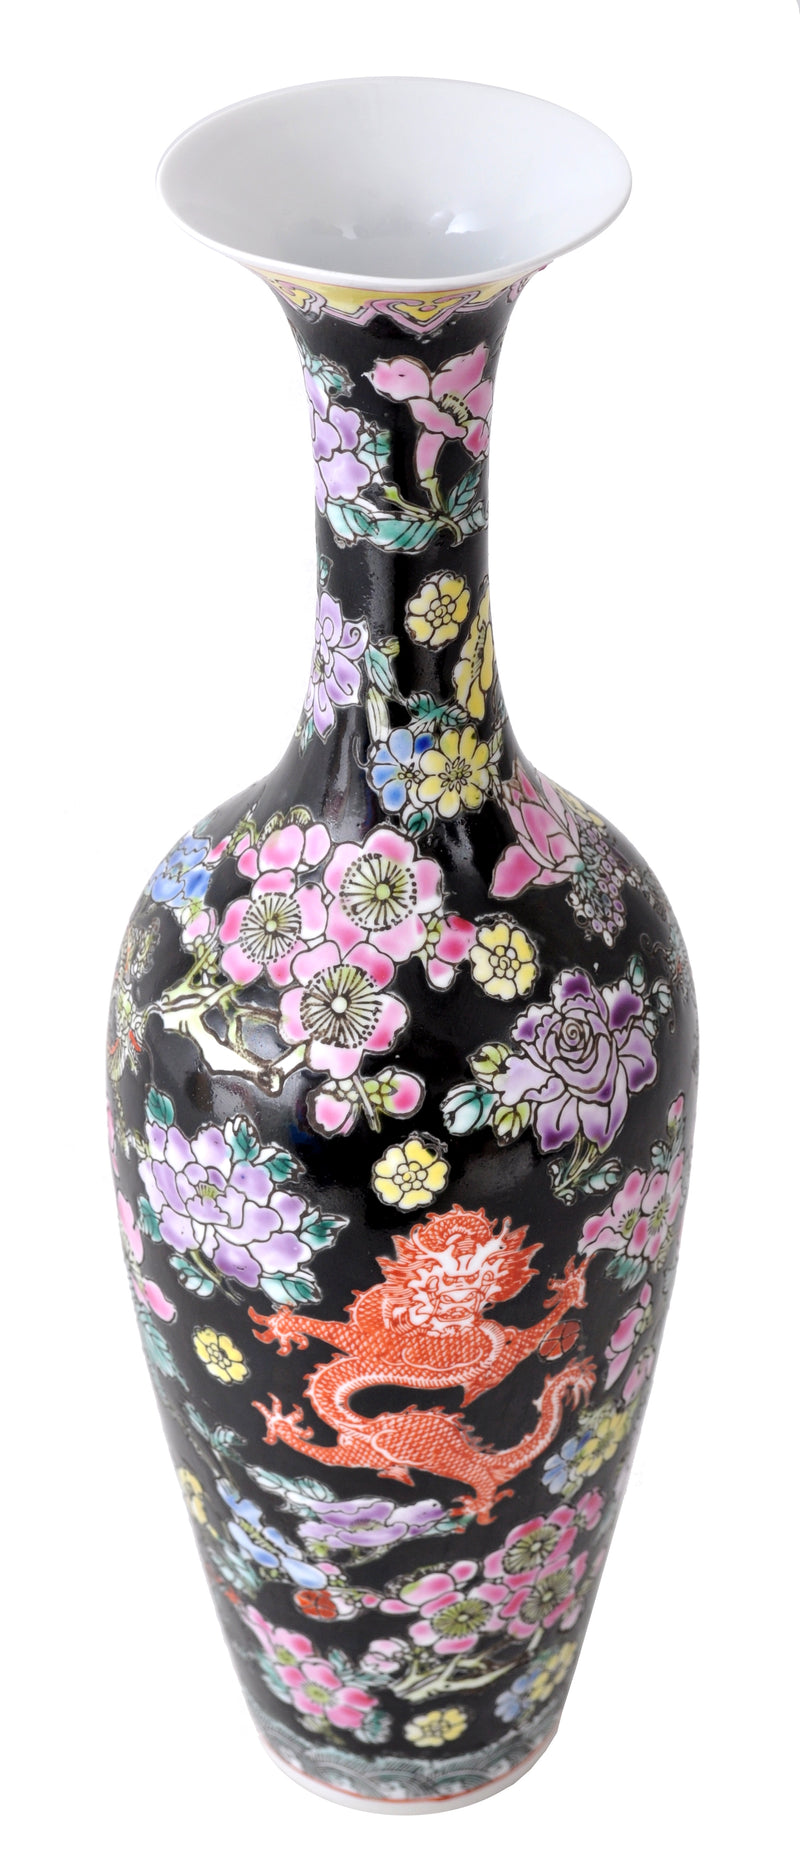 Antique Chinese Qing Dynasty Imperial Famille Noir Porcelain Vase, circa 1890